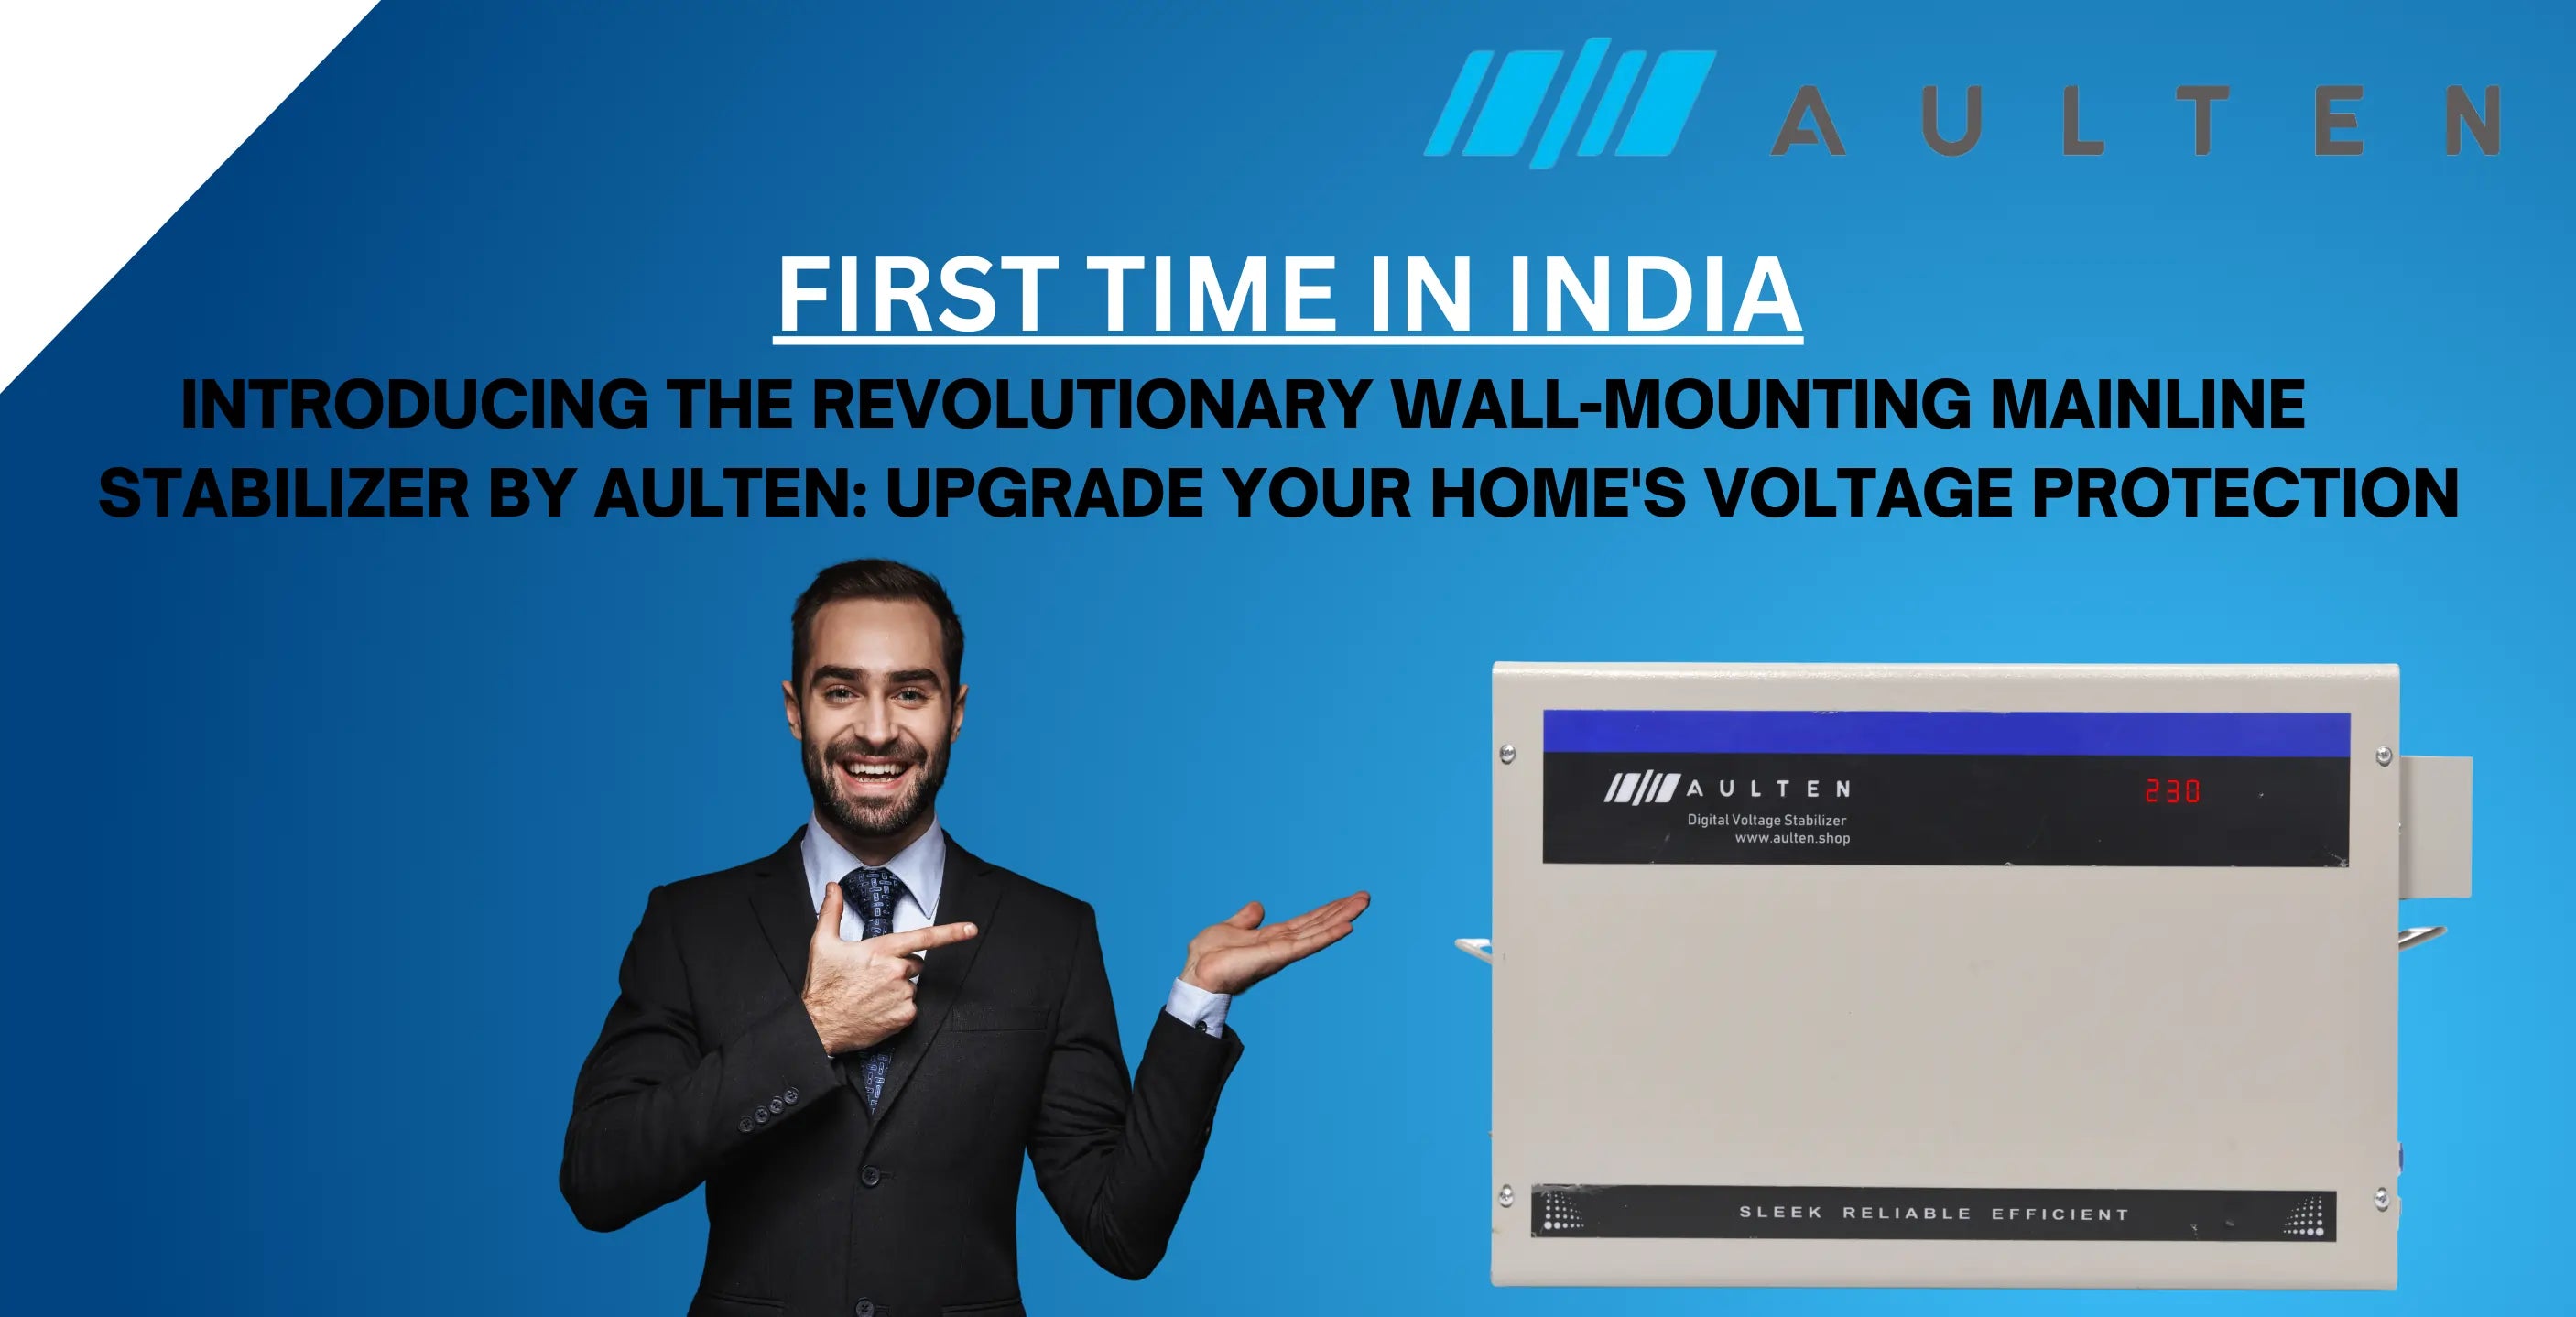 Introducing the Revolutionary Wall-Mounting Mainline Stabilizer by Aulten: Upgrade Your Home's Voltage Protection